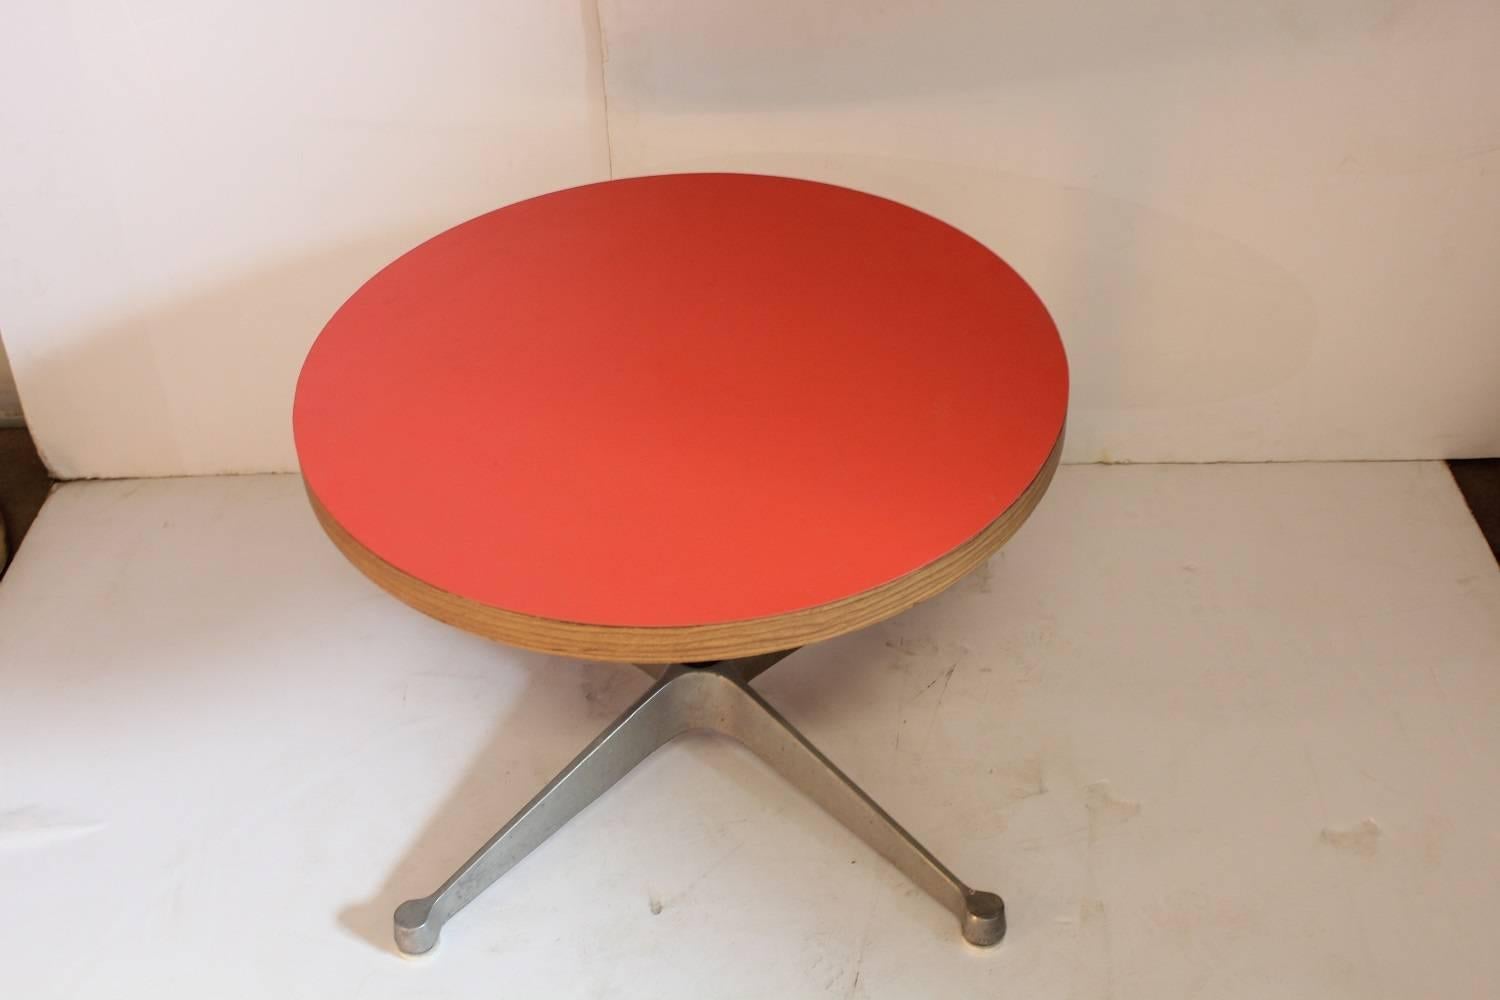 Mid-Century coffee table or side table by Charles & Ray Eames for Herman miller.